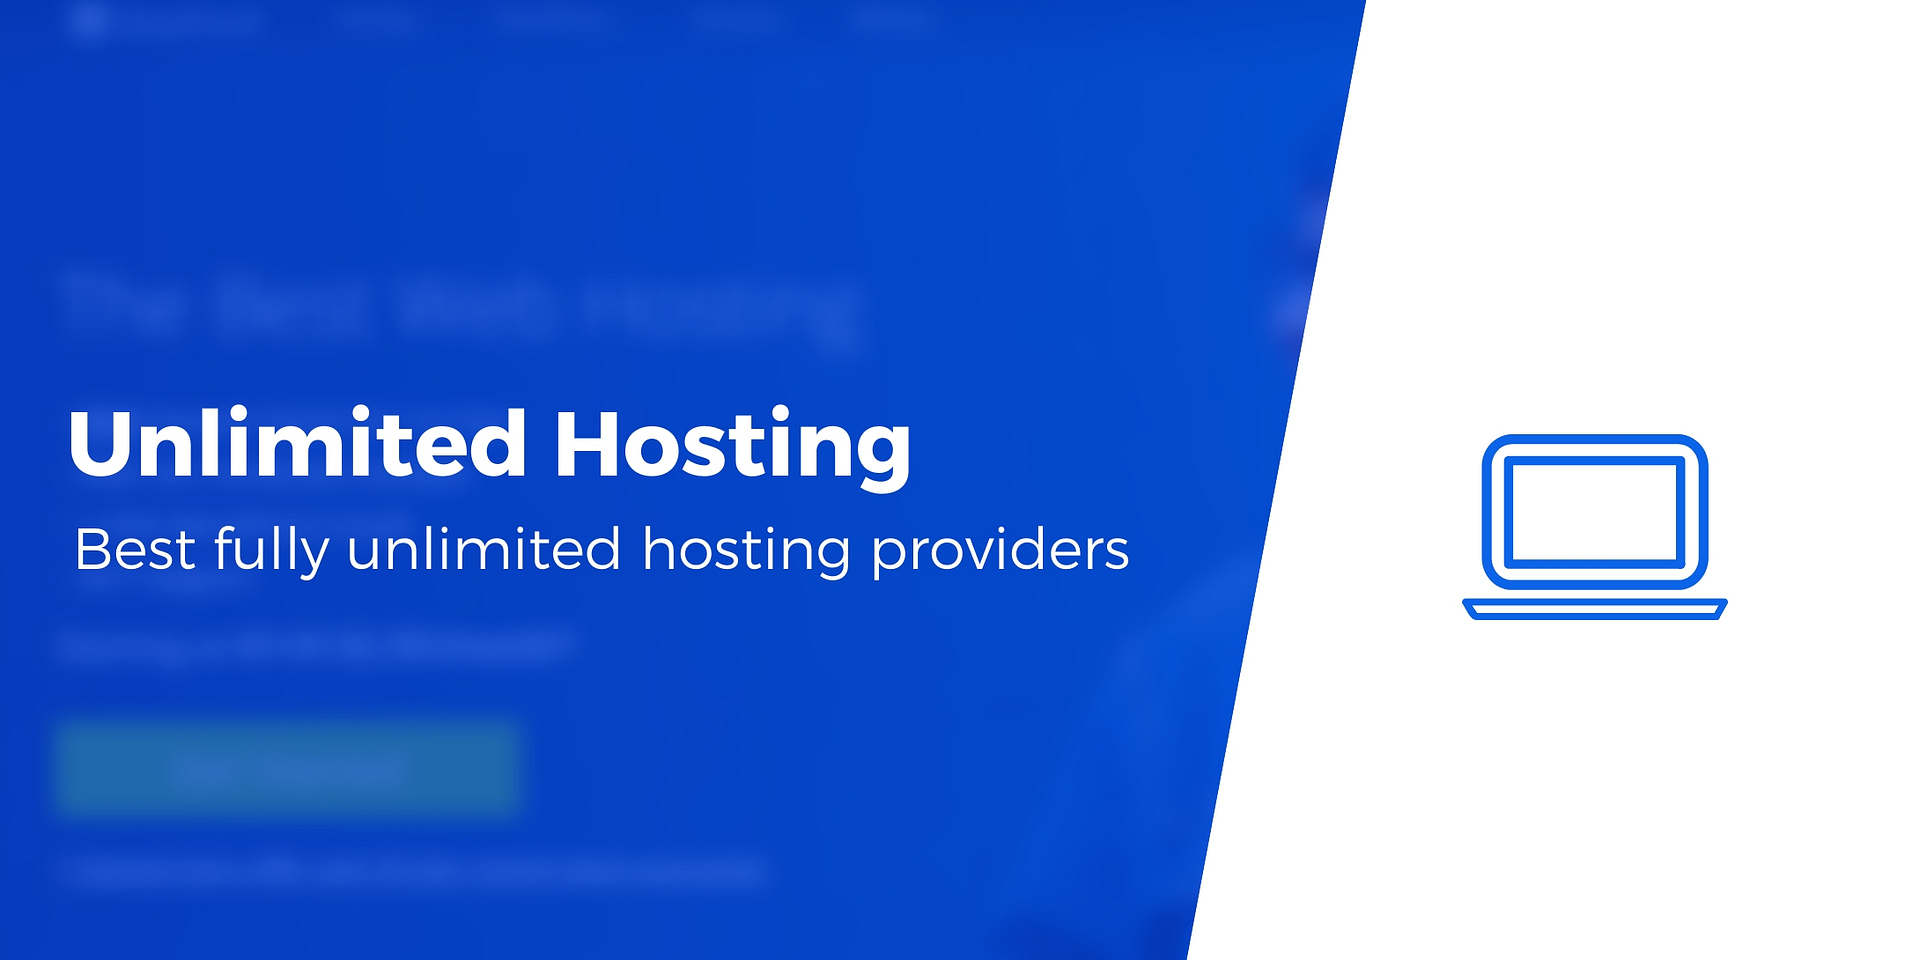 4 Best Unlimited Hosting Plans Websites Bandwidth And Storage Images, Photos, Reviews